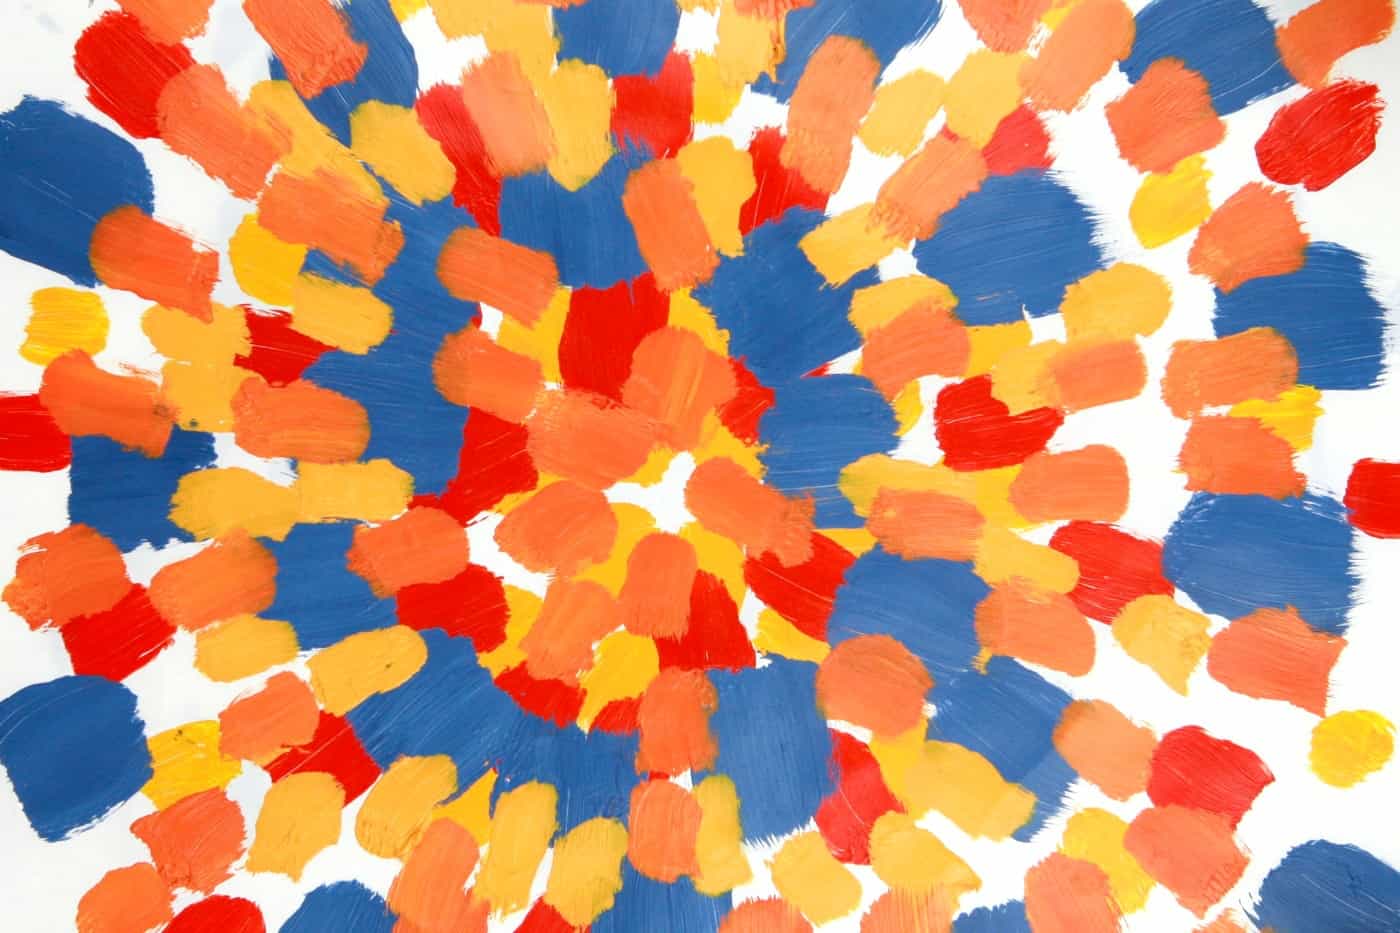 orange, blue, and yellow acrylic paint daubs on paper radiating out from center